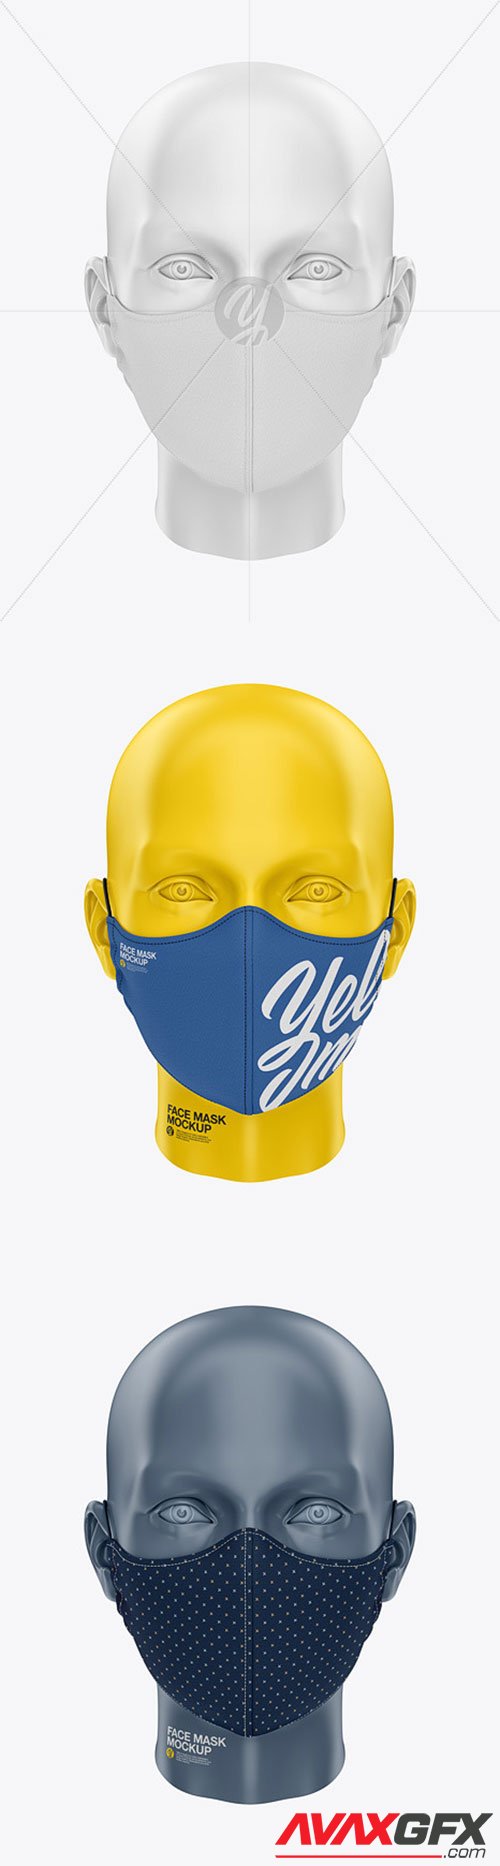 Face Mask with Elastic Cord and Stopper - Front View 61447